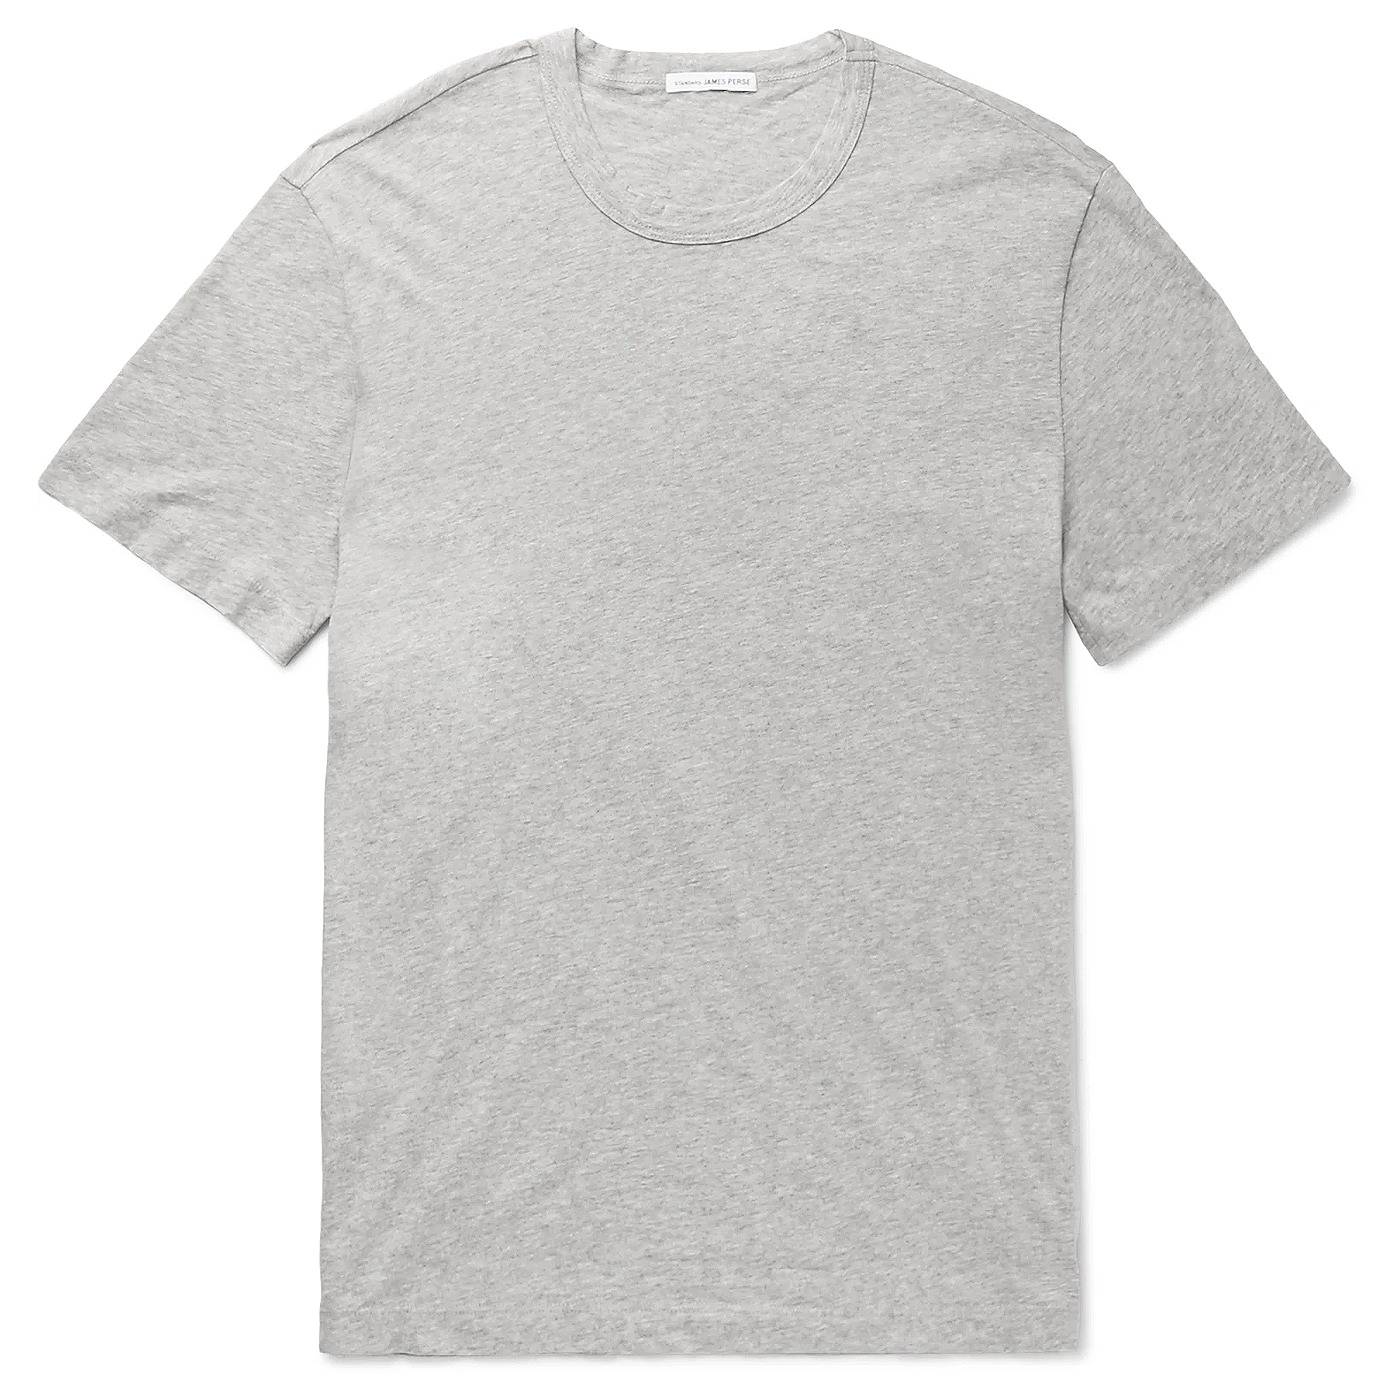 Style Mr Porter Tshirt James Perse Gris